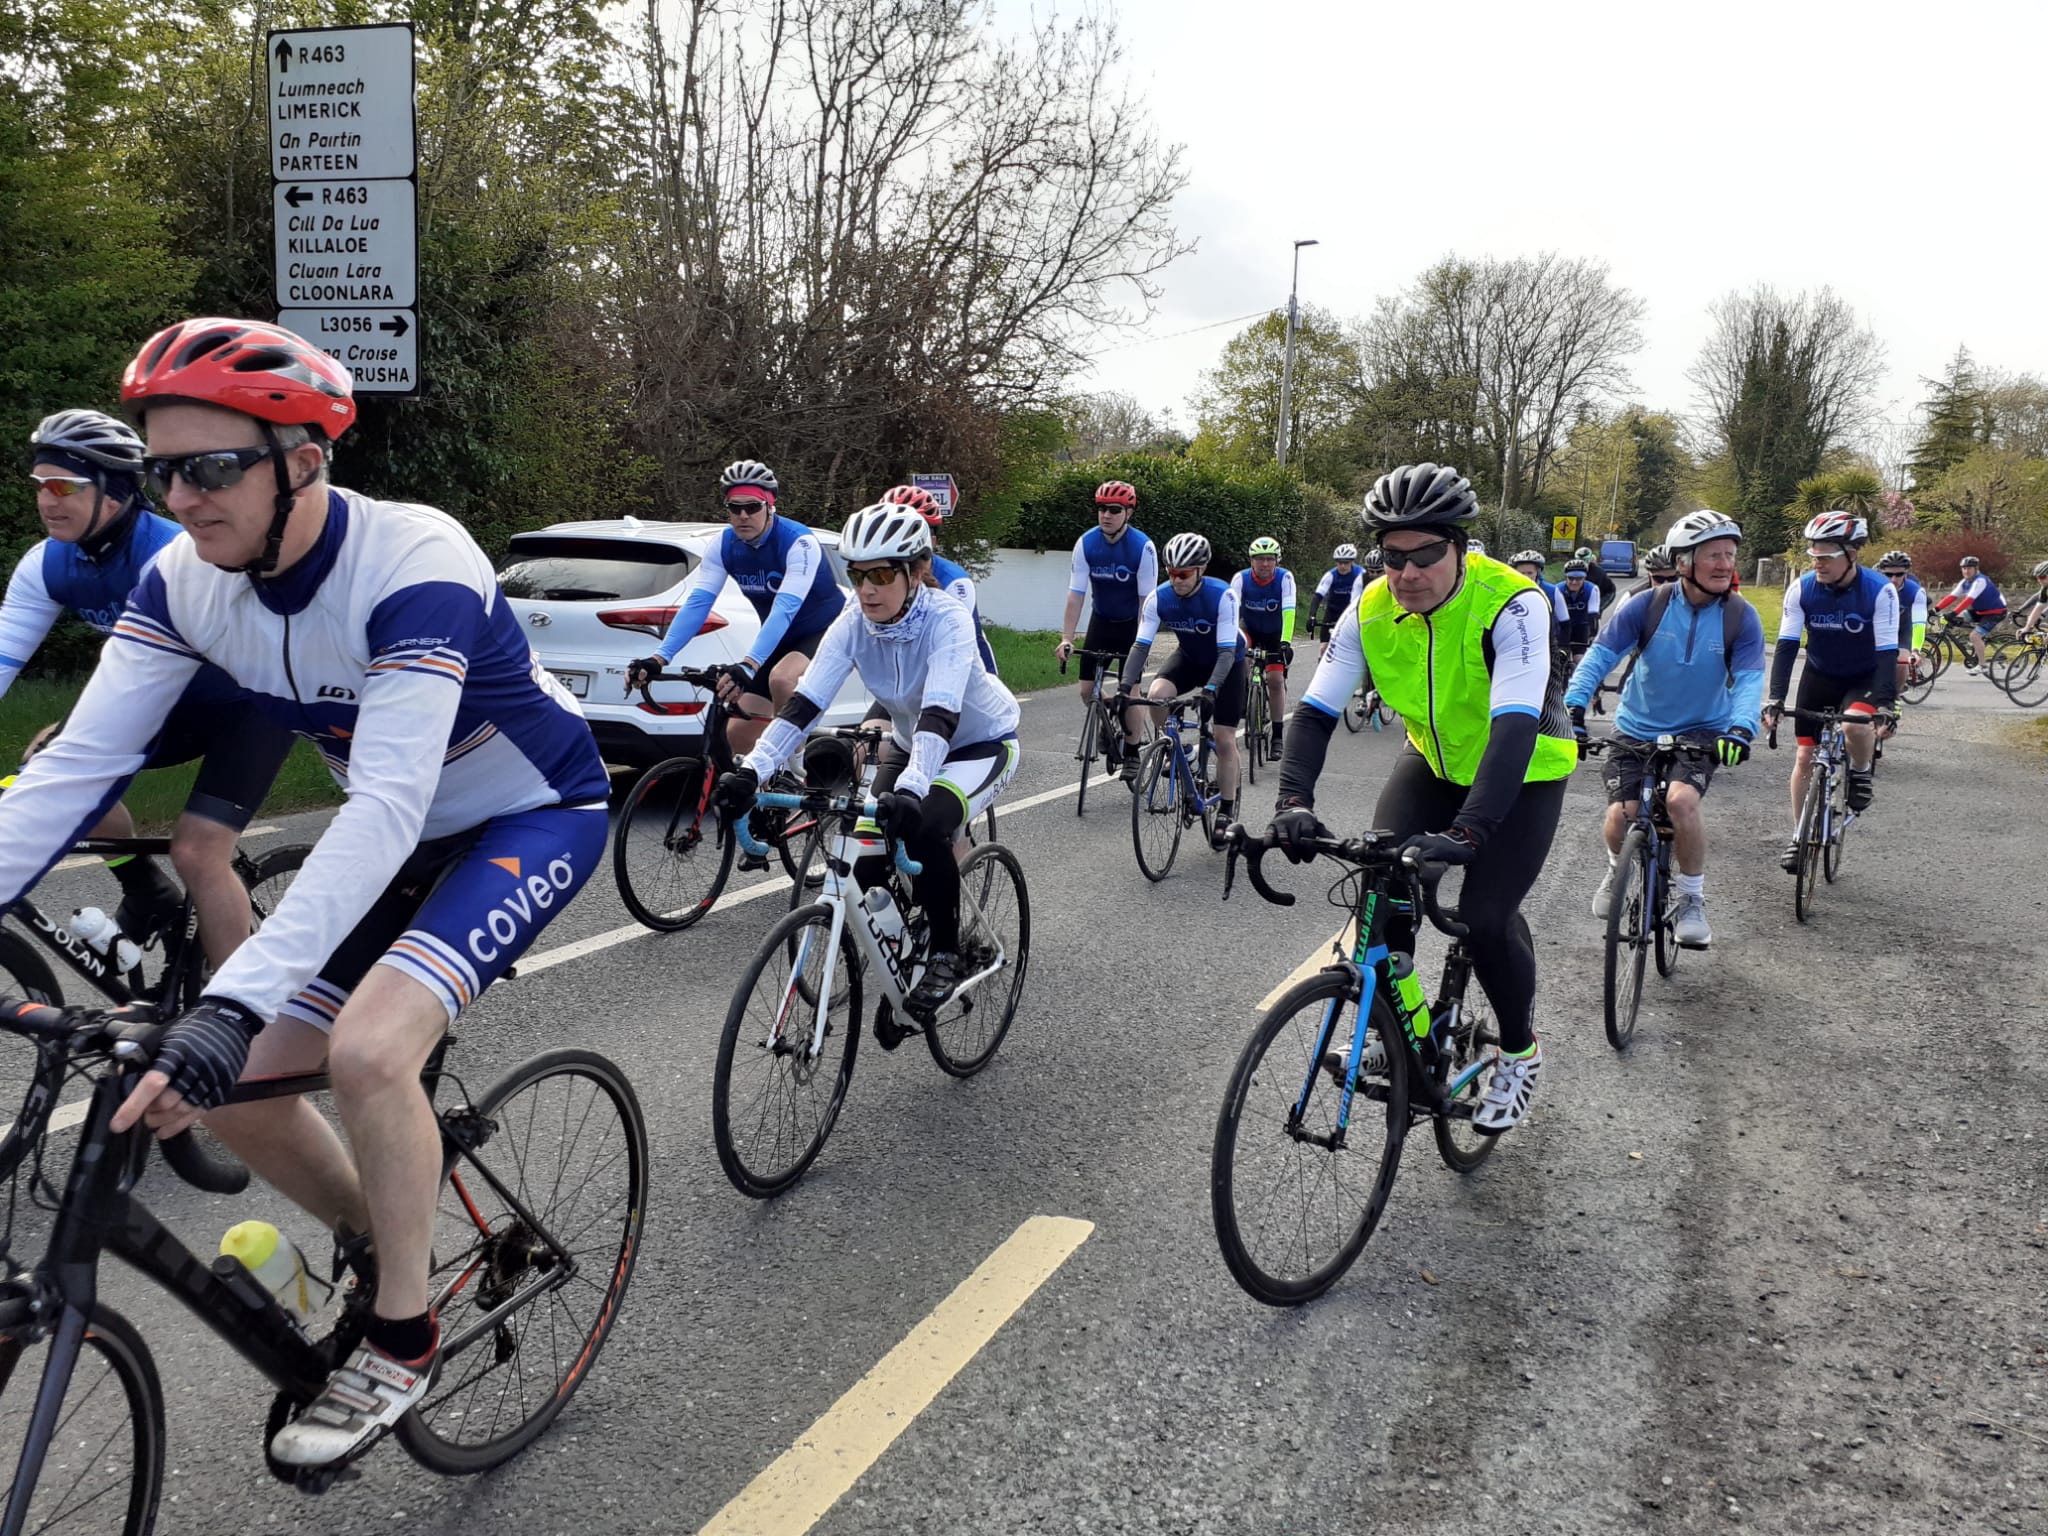 Limerick cyclists have been invited to take part in an Irish Motor Neurone Disease Association charity cycle this April 22